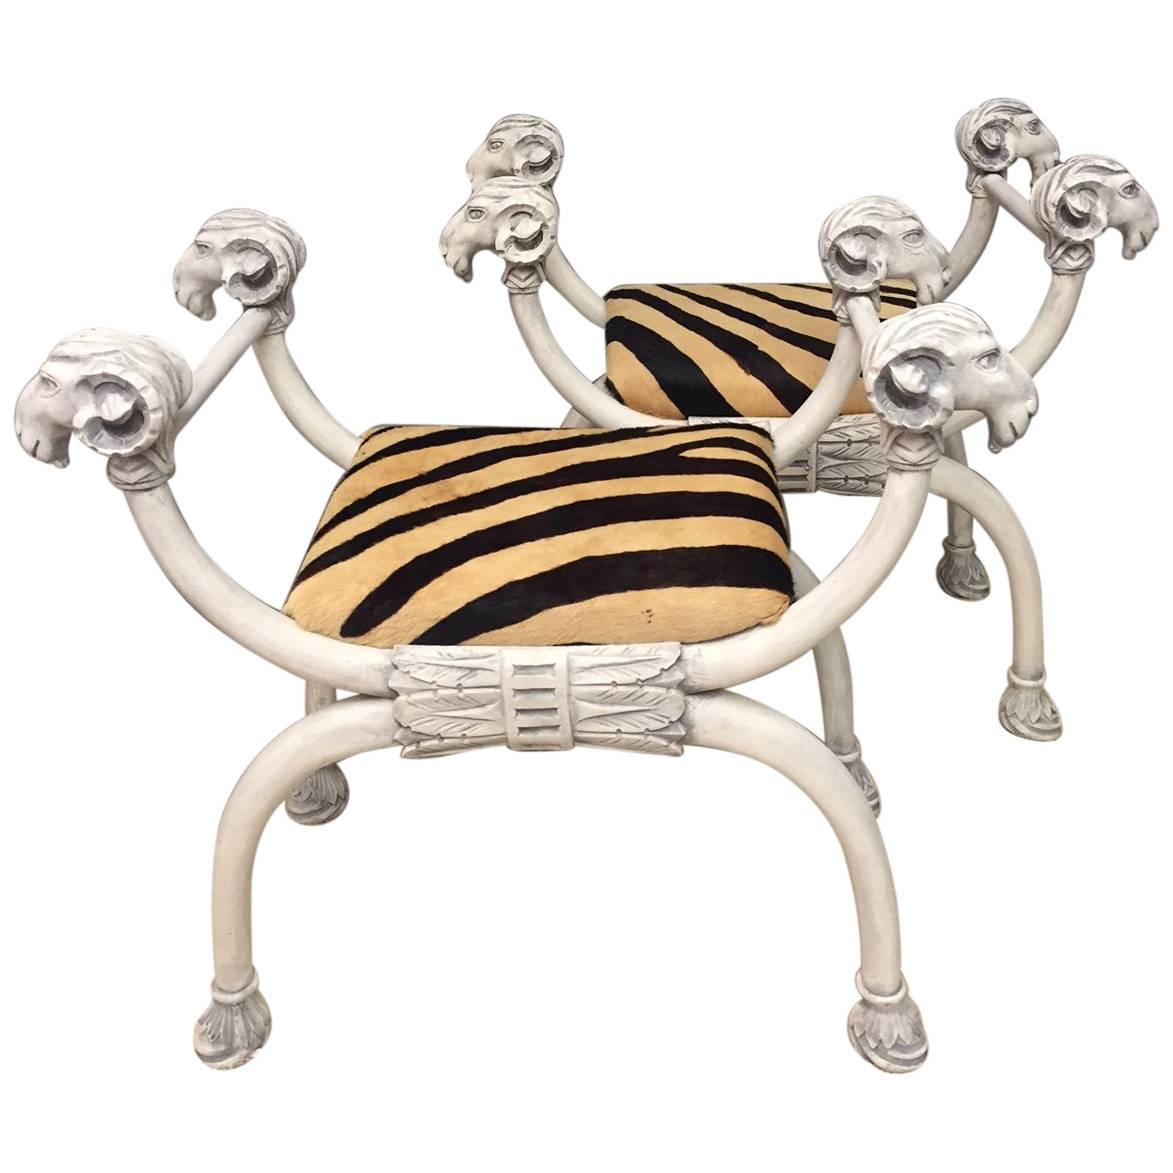 Dramatic Pair of Ram's Head Benches with Printed Cowhide Zebra Motife Seats